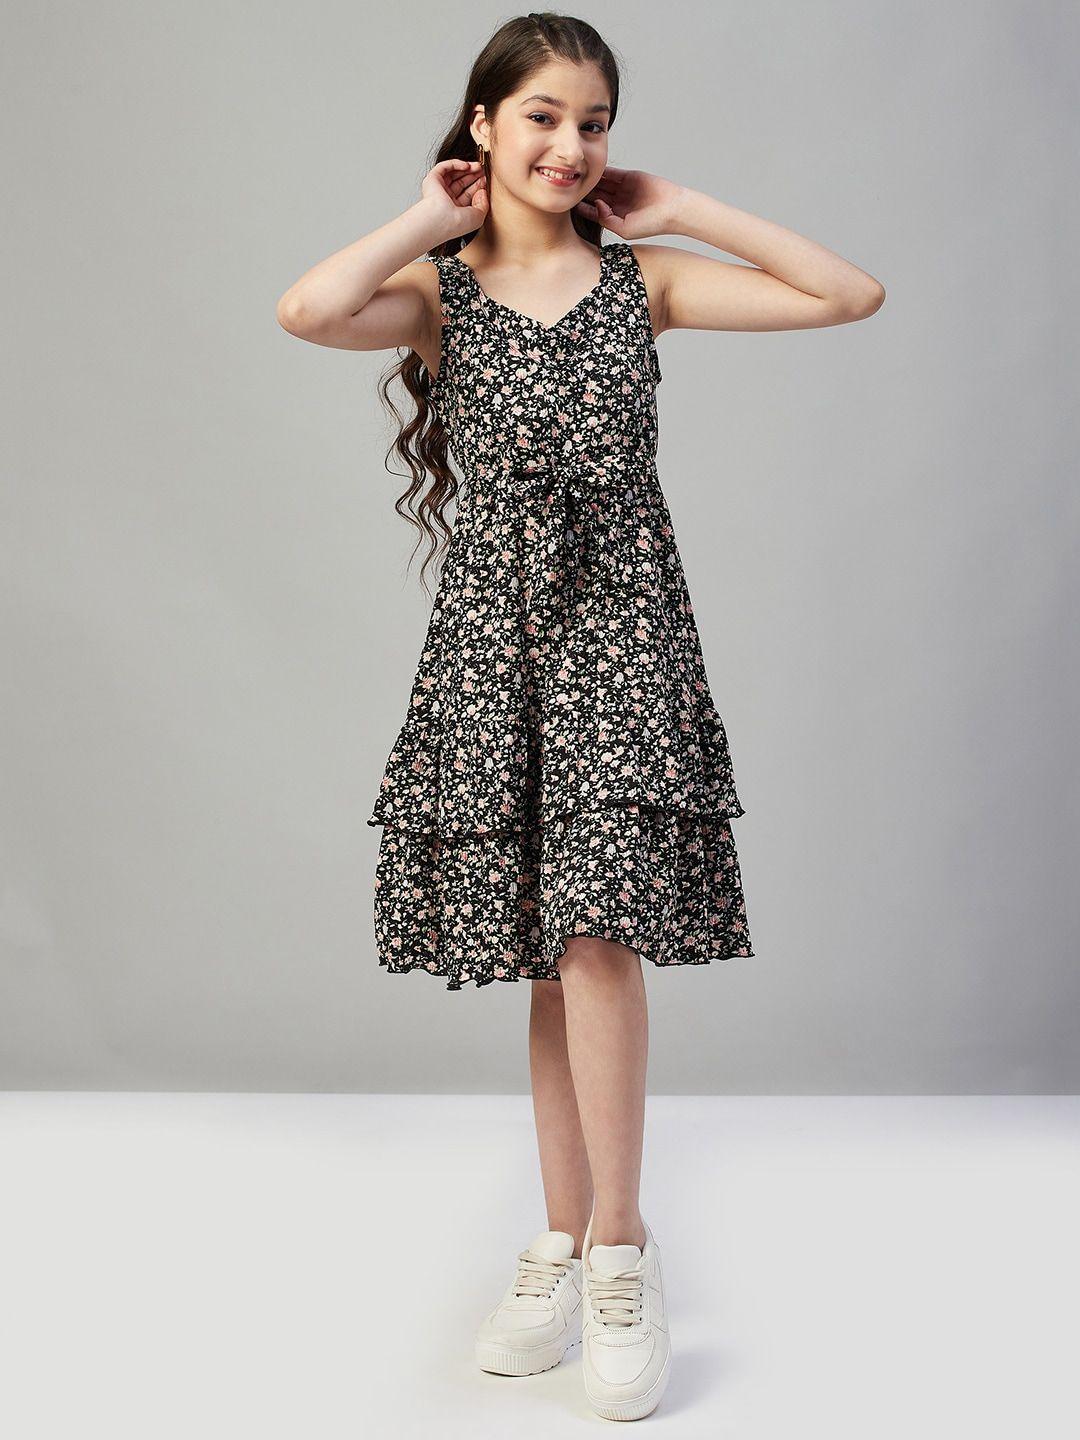 stylo-bug-girls-floral-printed-layered-fit-&-flare-dress